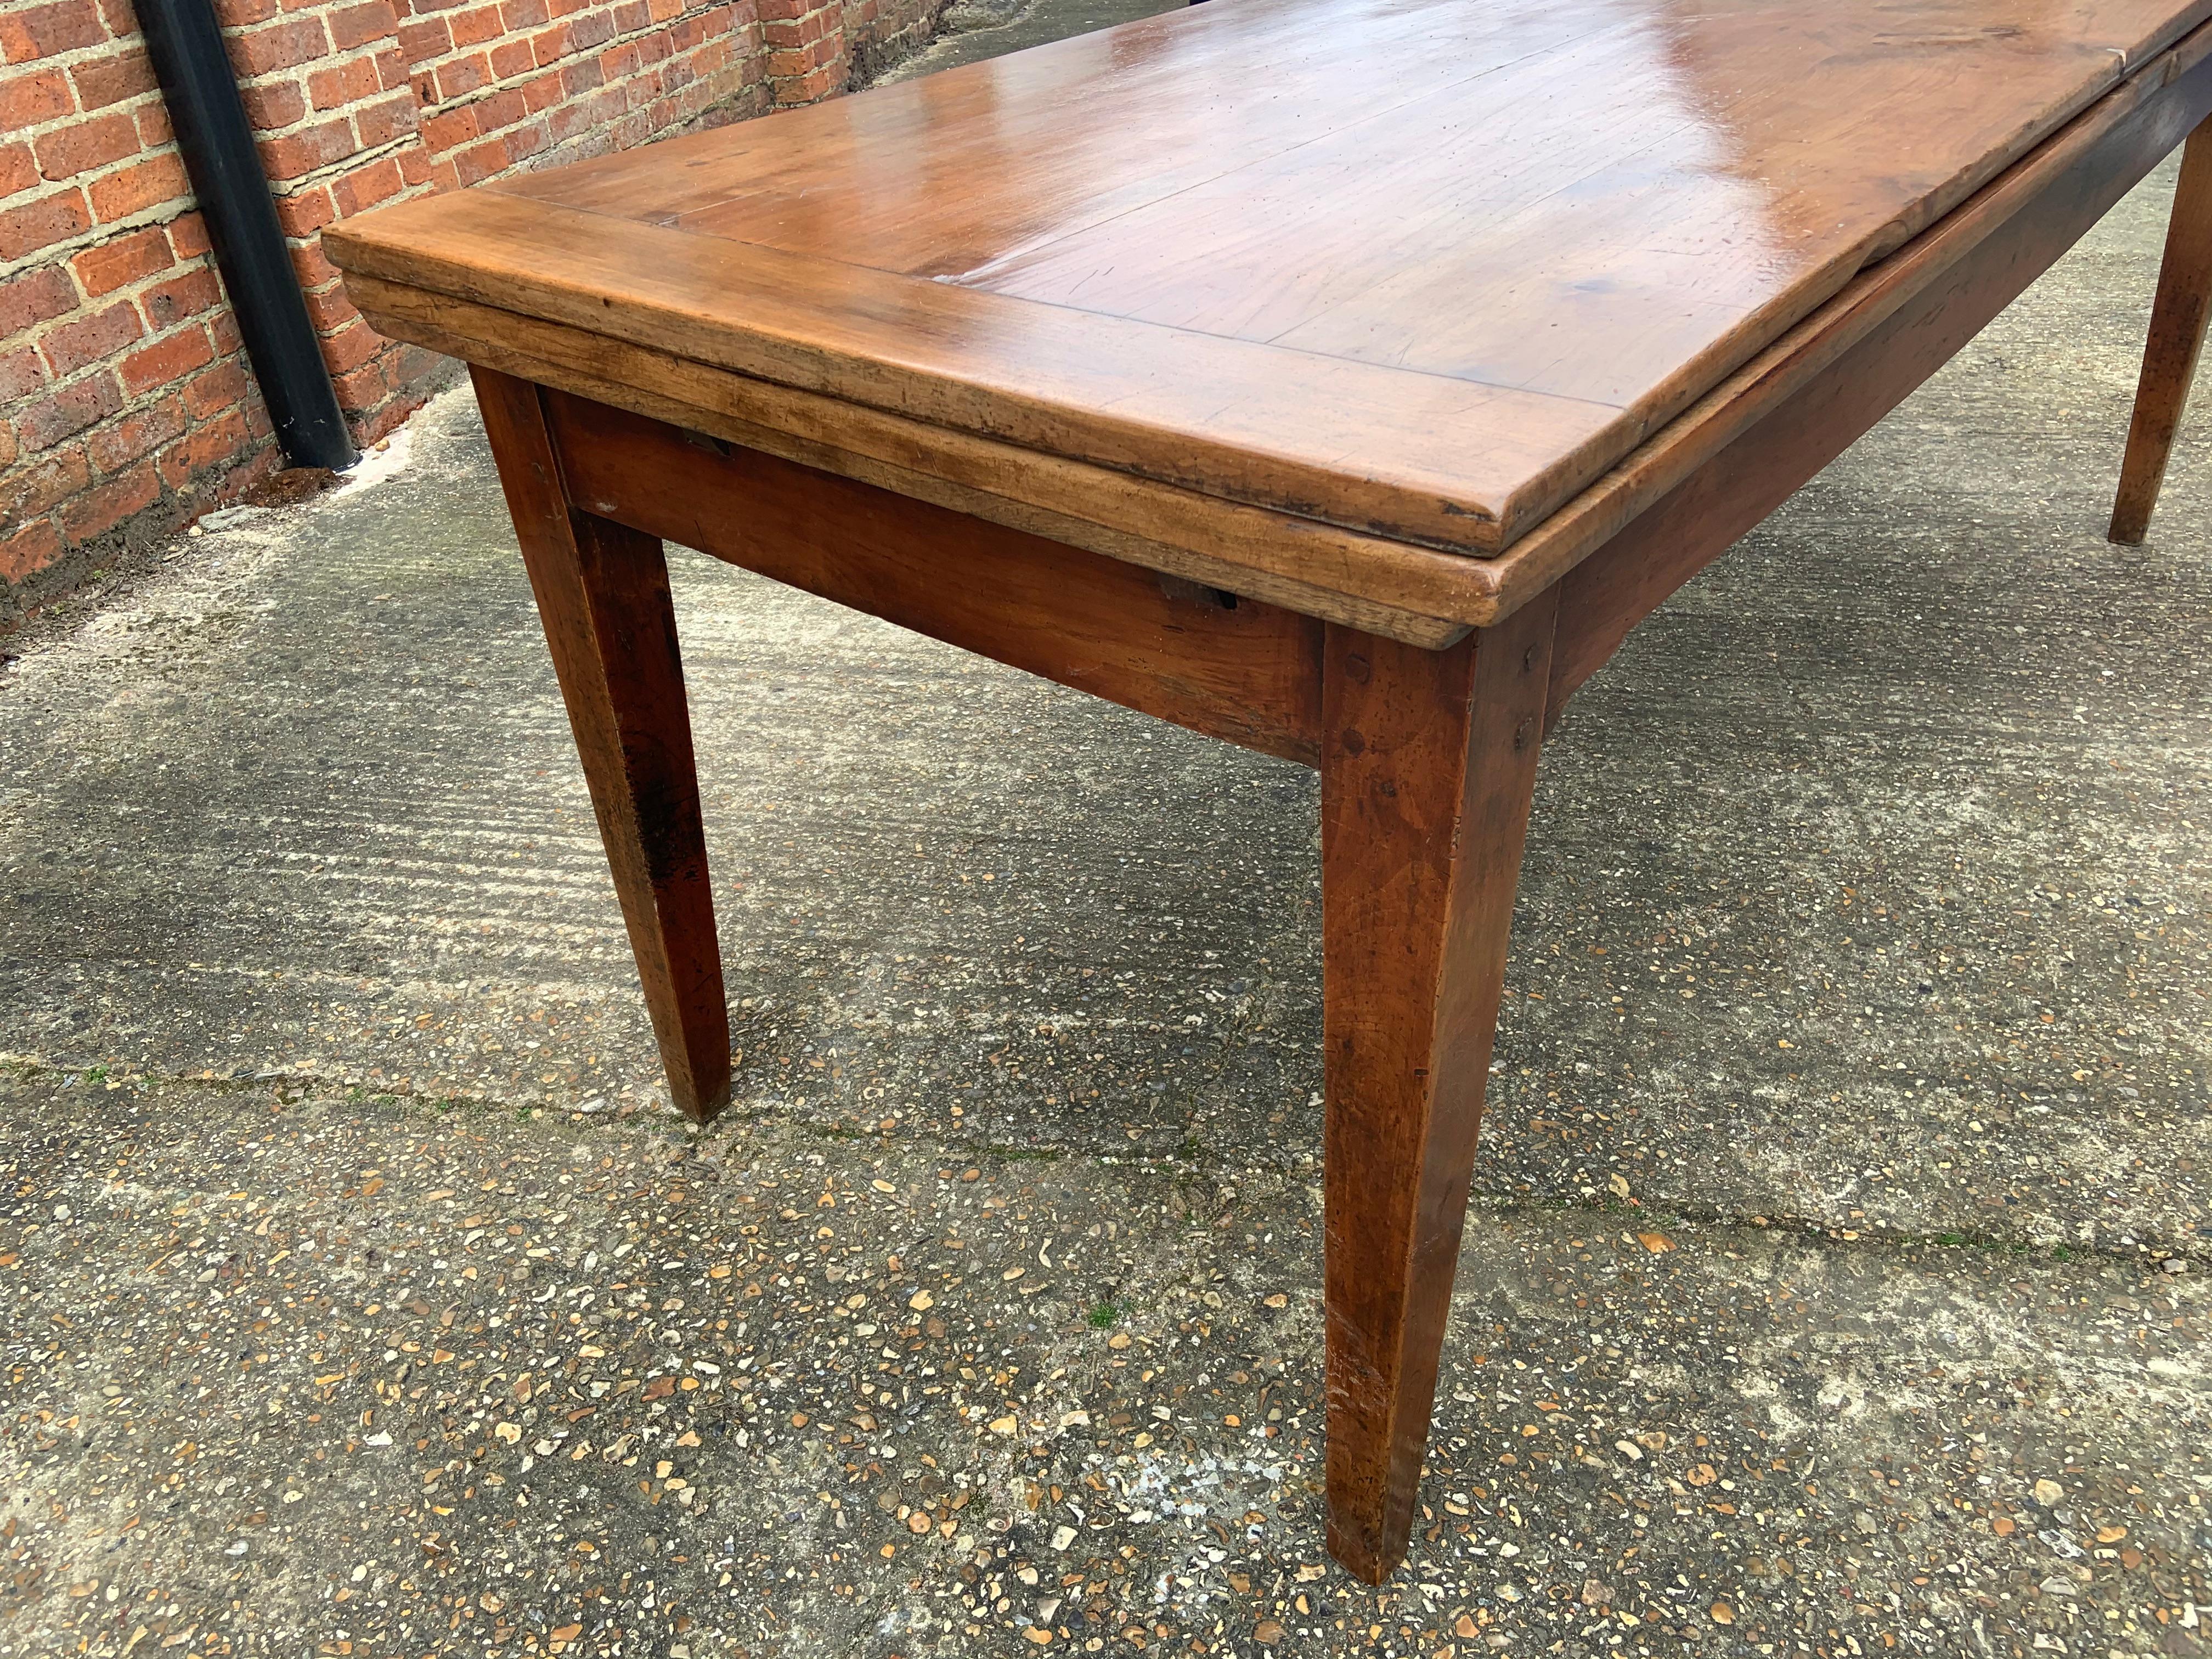 19th century cherry double extending farmhouse table with gorgeous patination and colour. The sits on four sturdy tapered legs. When closed table is 2m in length and open it is 388cm long. You can use one leaf at a time or both to fully extend